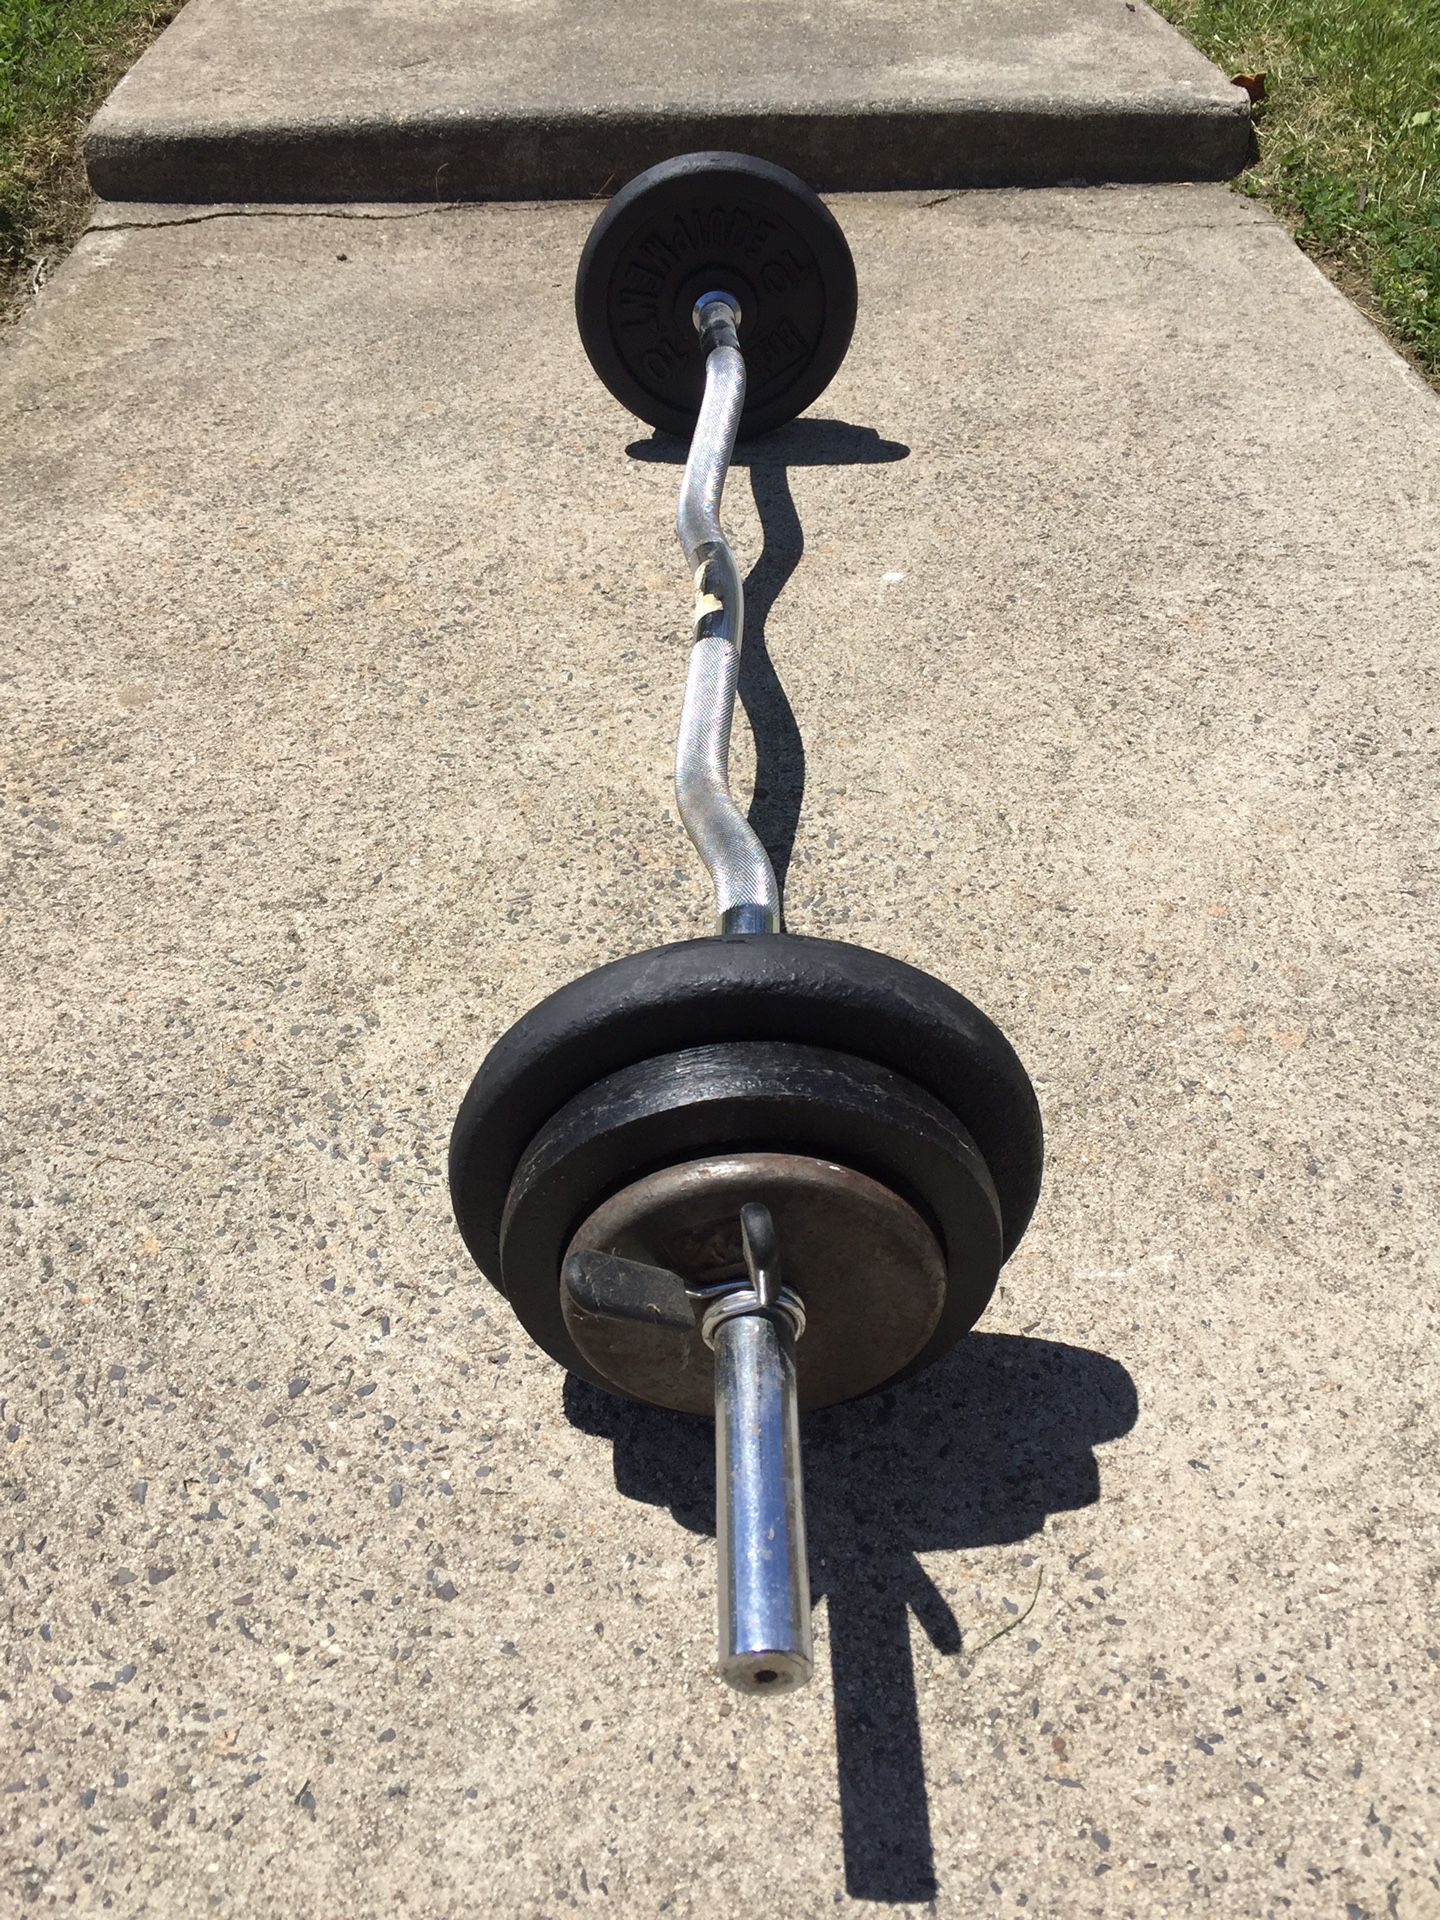 Standard curl bar with 40 pounds of metal weights